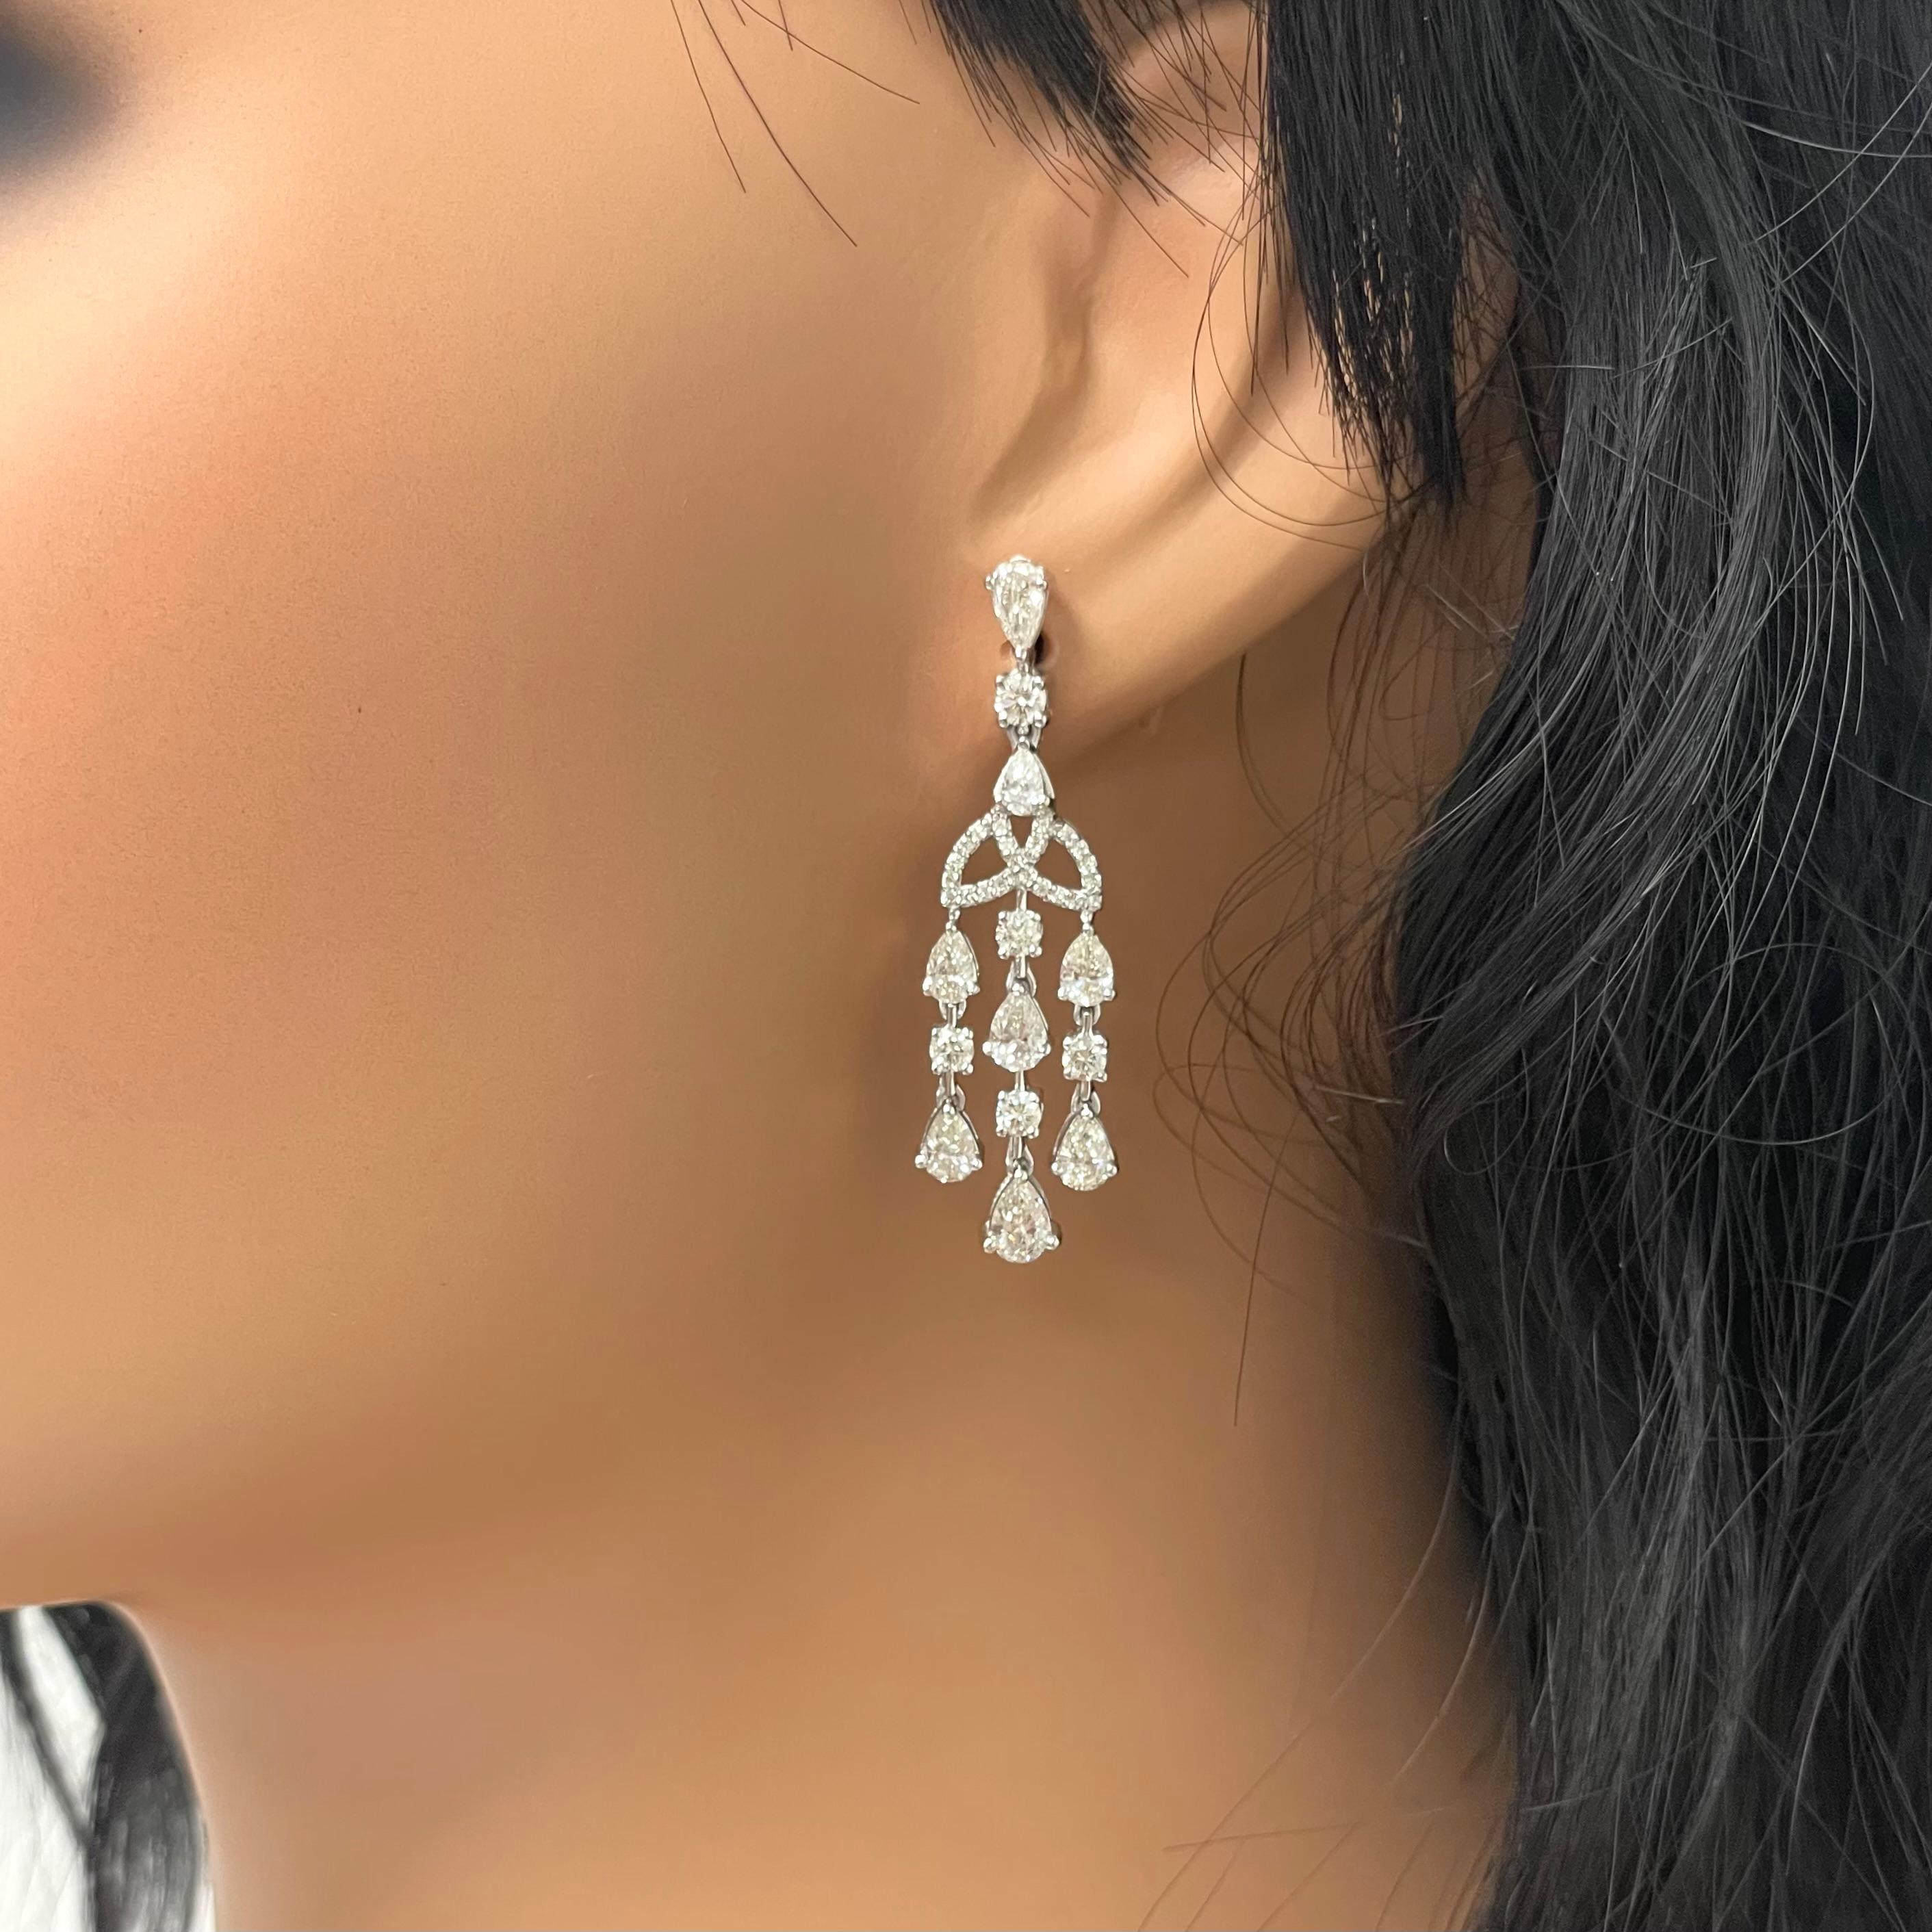 Sweet and sultry, the Eterna Diamond Earrings are a delicate yet impactful pair. They are a classic that can be worn to impress on a casual evening out or for a more stated look.

Diamonds Shape: Pear Shape & Round
Side Diamonds Weight: 4.21 ct
Side